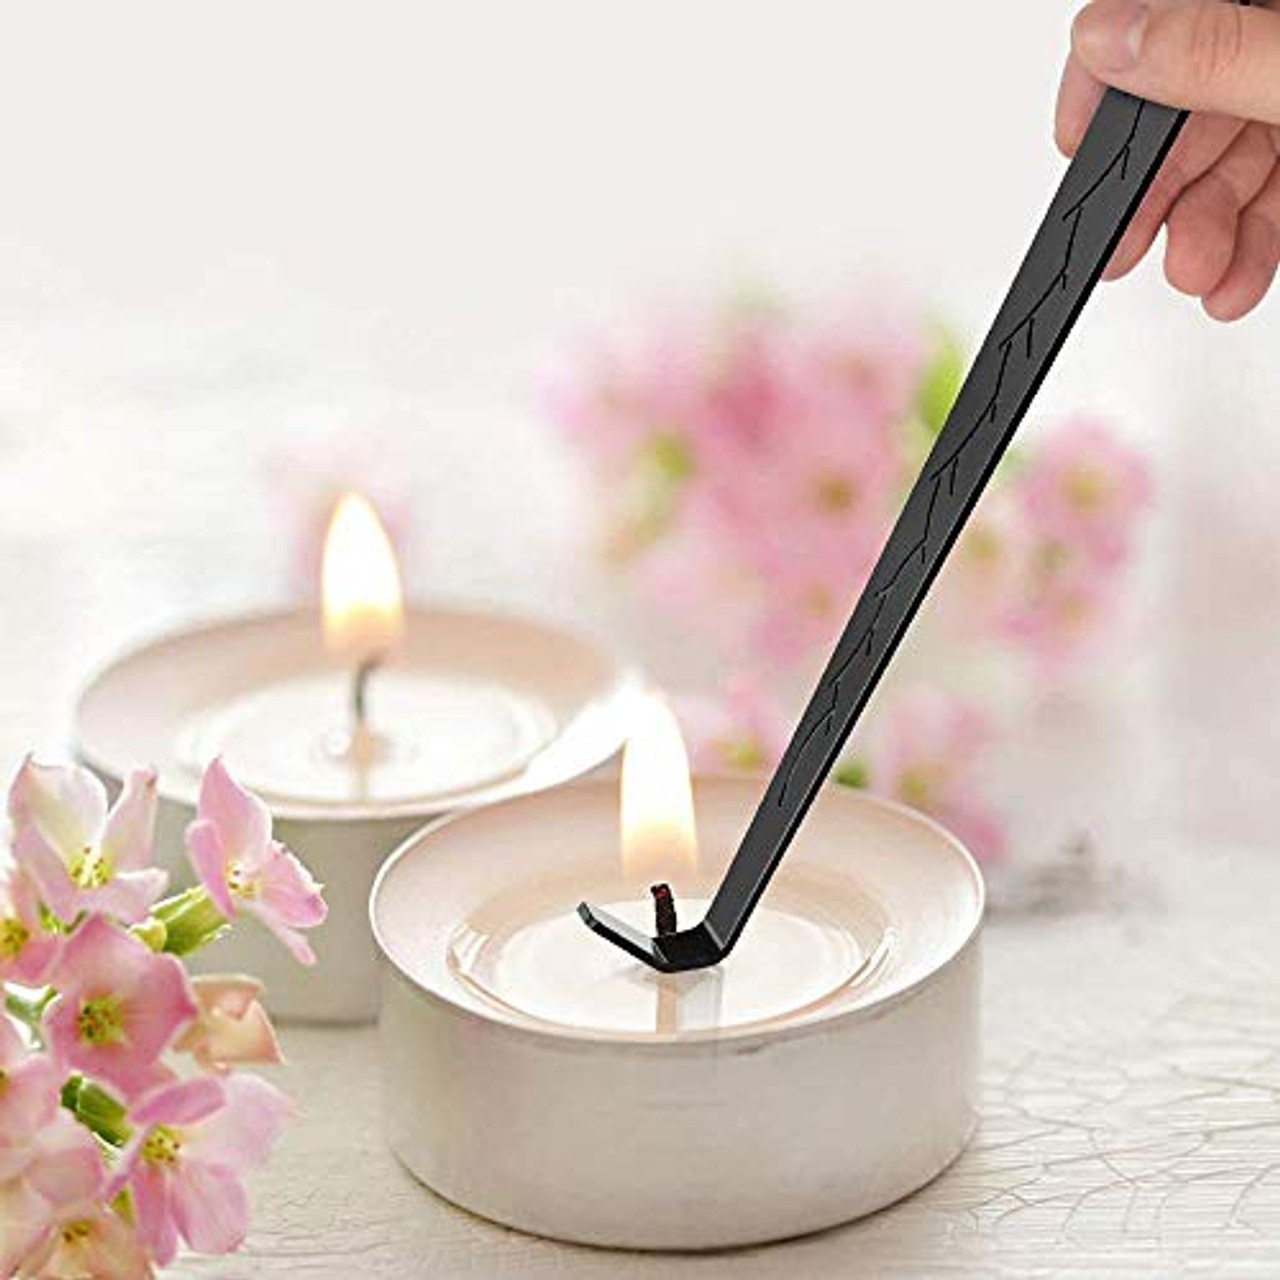 Candle Tool, Wick Trimmer Cutter, Snuffer, Wick Dipper, Gift